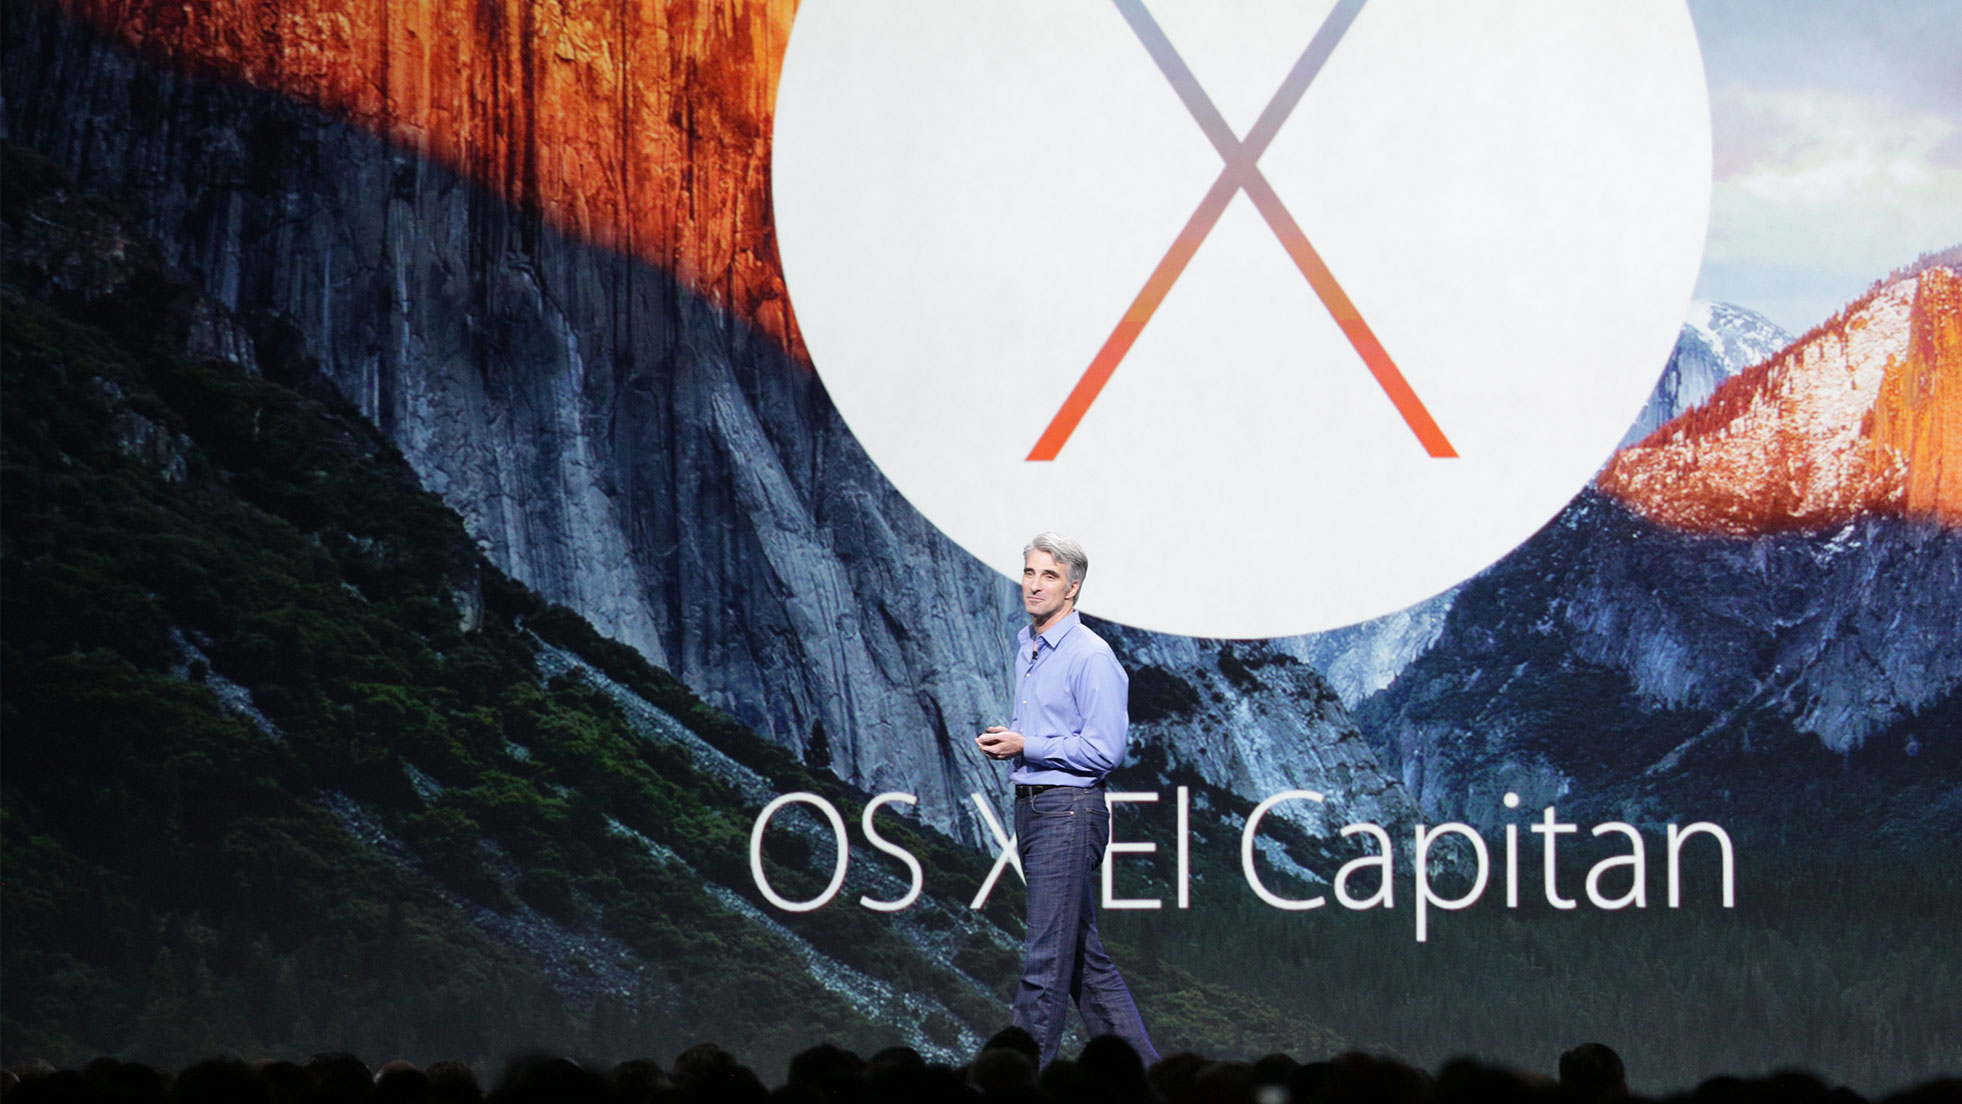 WWDC 2015: new version of OS X, called El Capitan, is presented